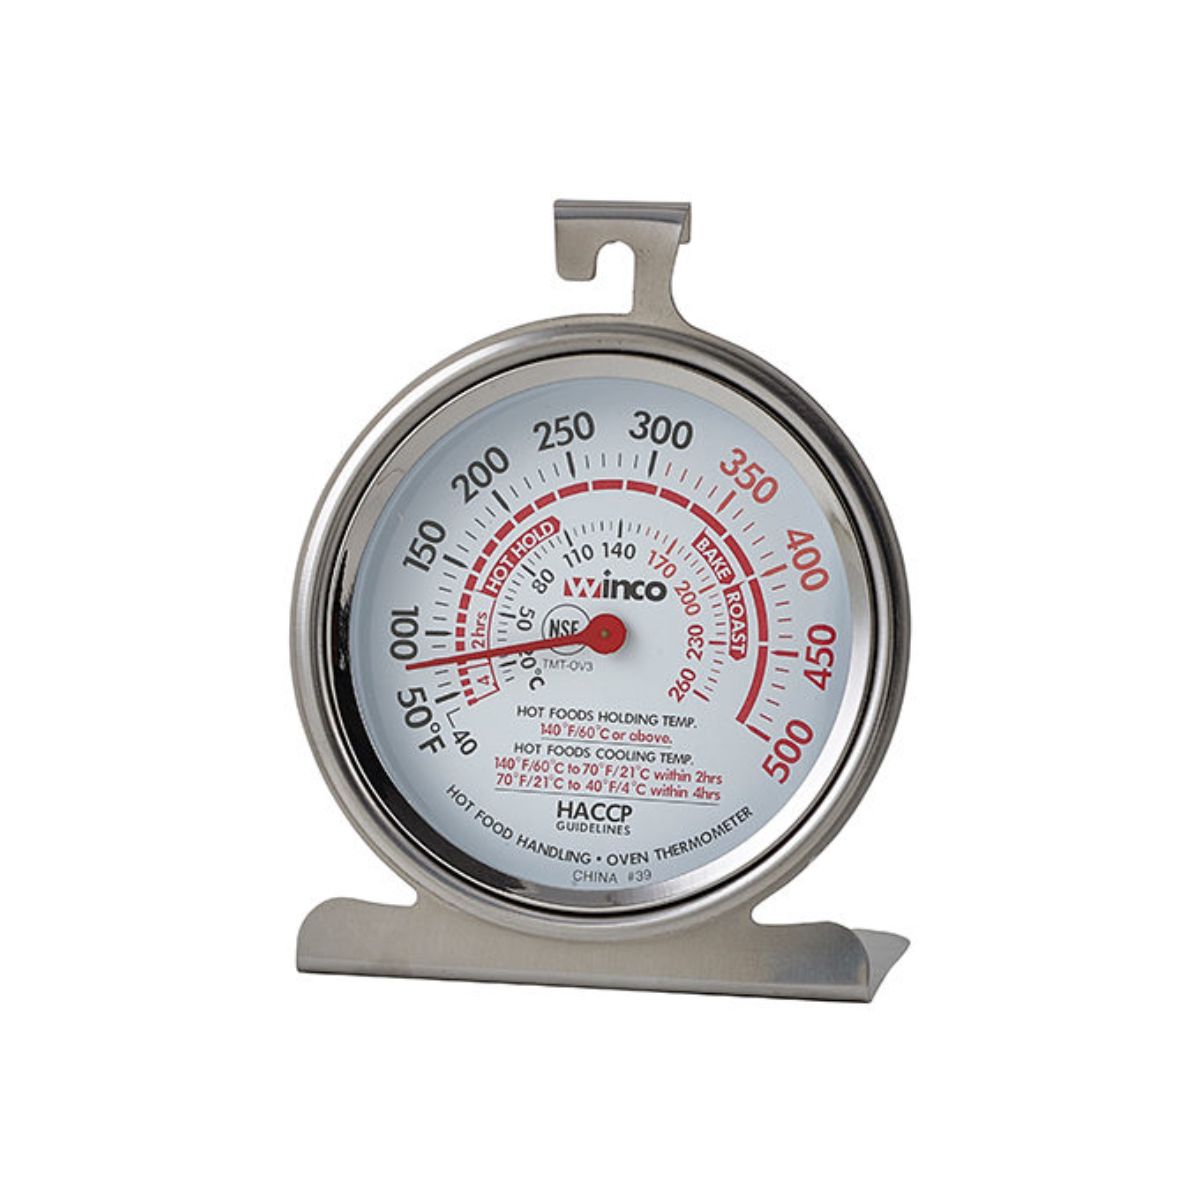 Pocket Thermometer - 1 Dial, 50F - 550F